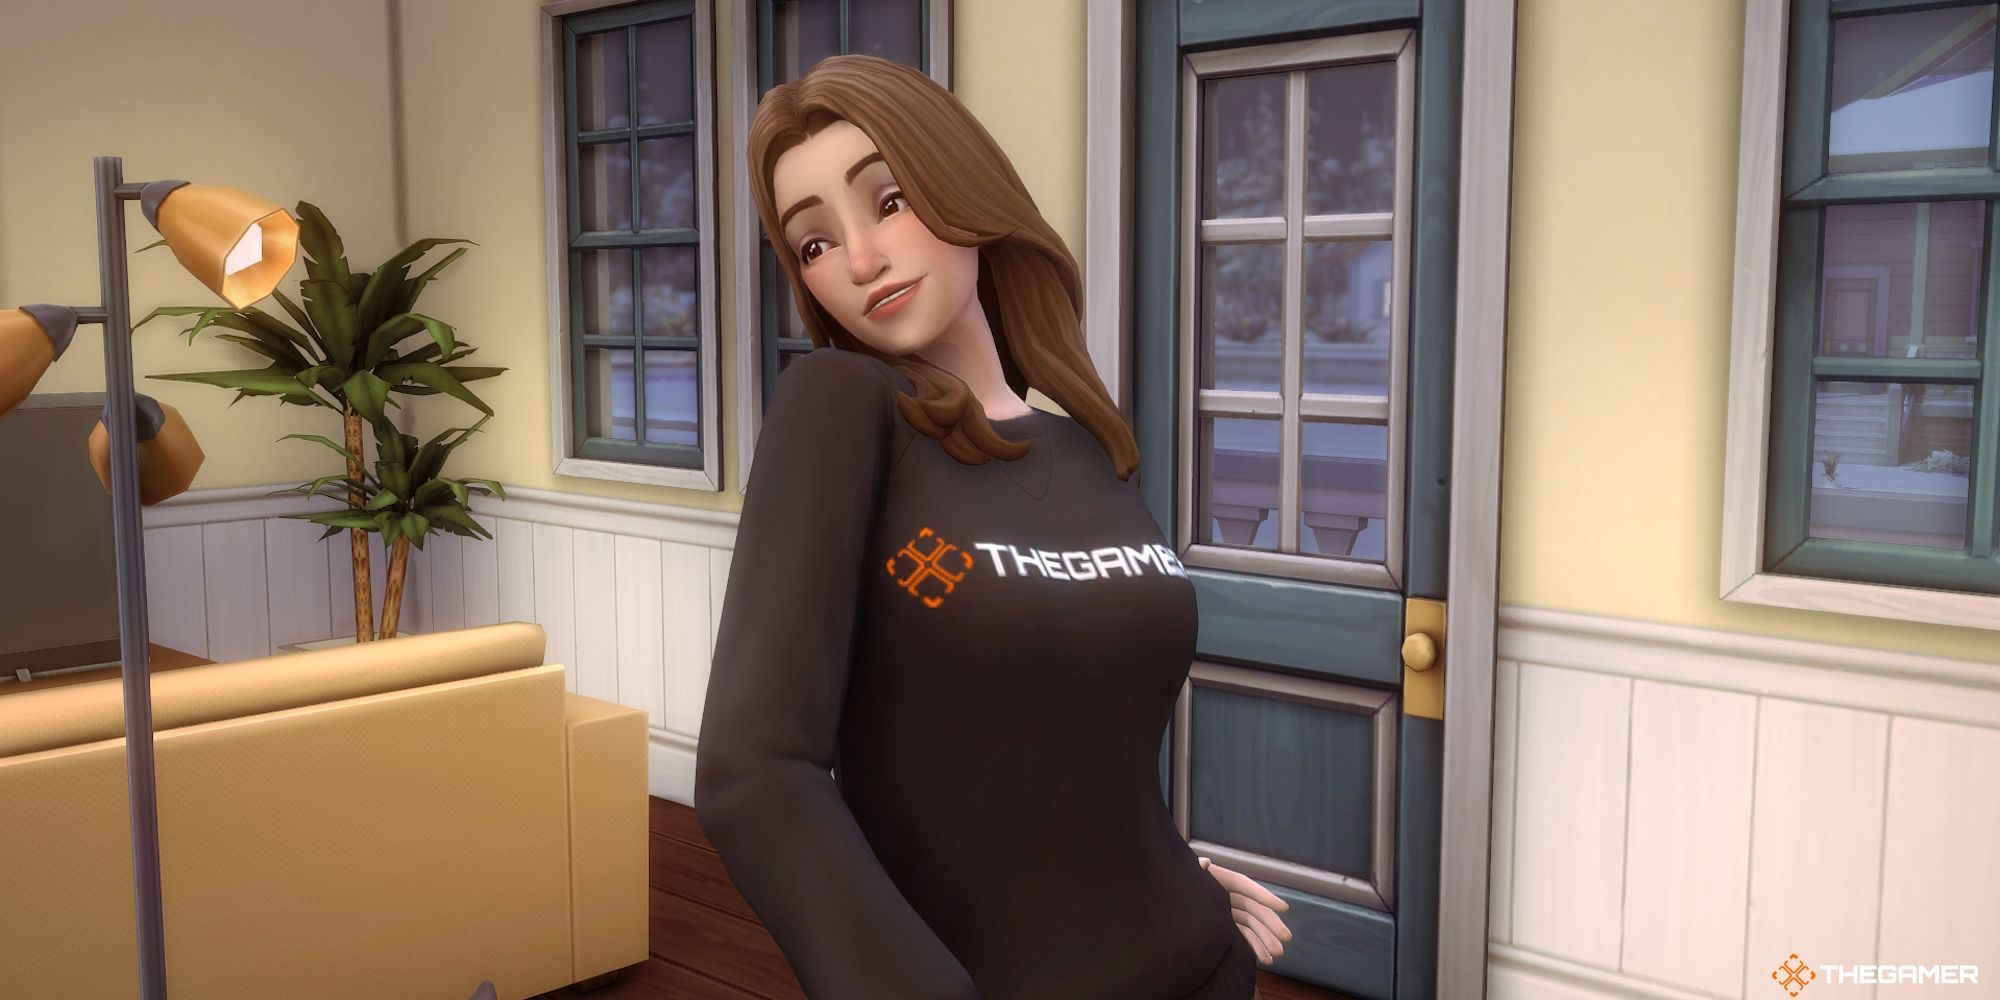 A Sim poses with a skin overlay in The Sims 4